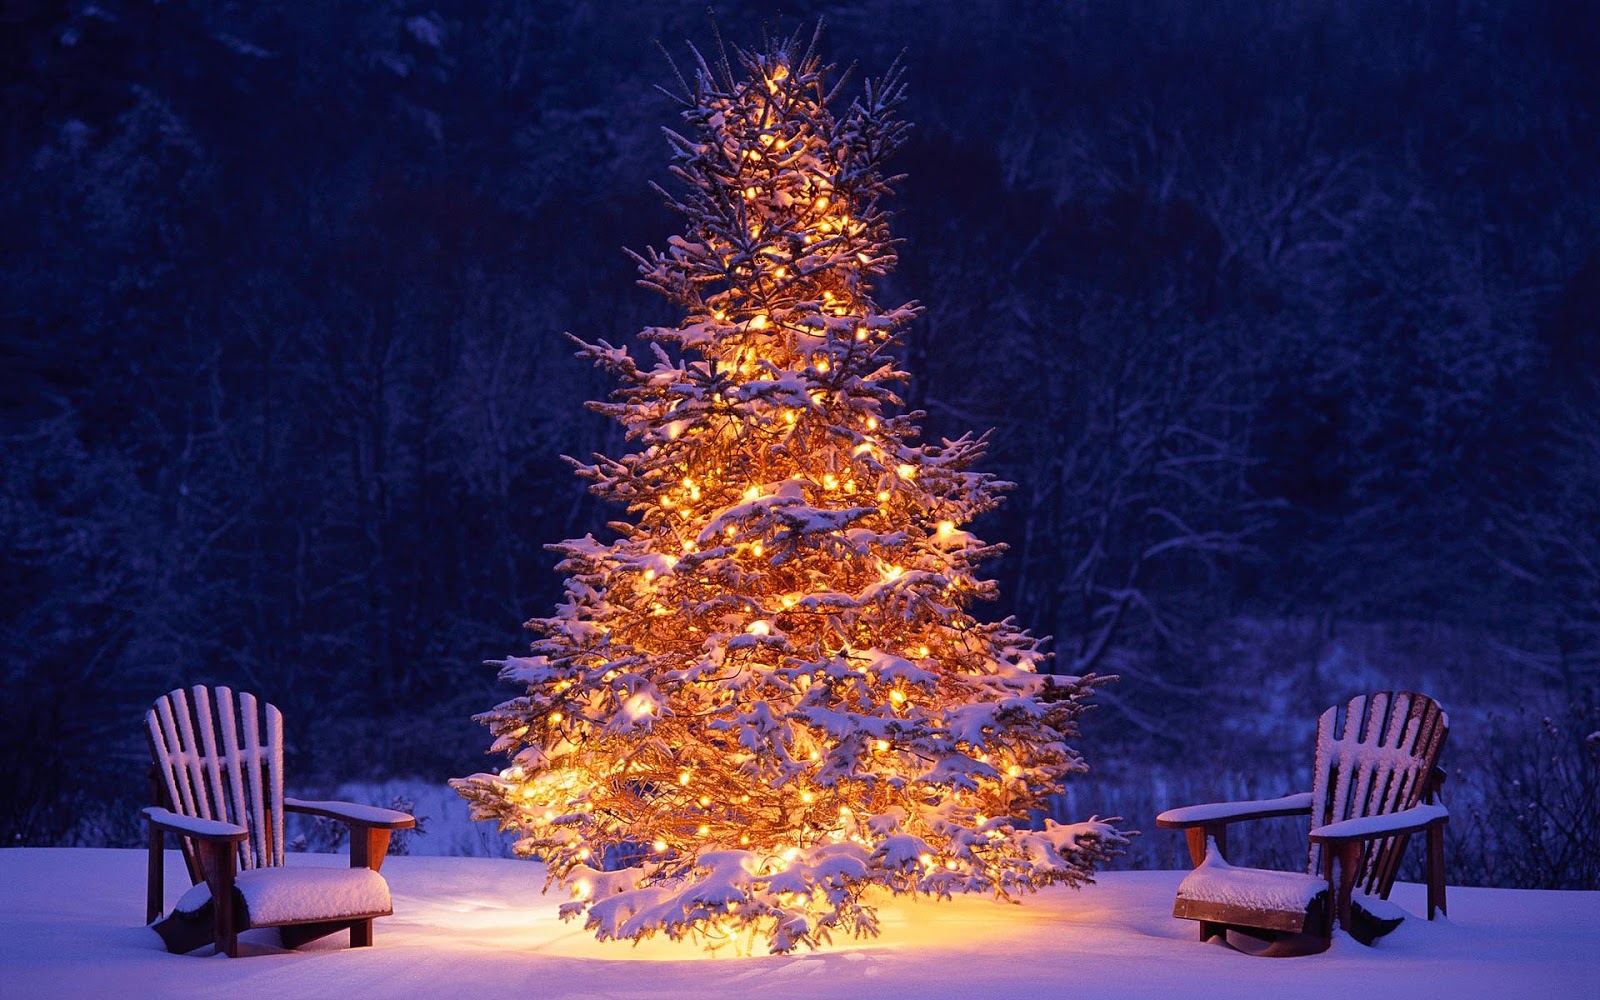 Lighted Christmas Trees Outside In The Snow HD Widescreen